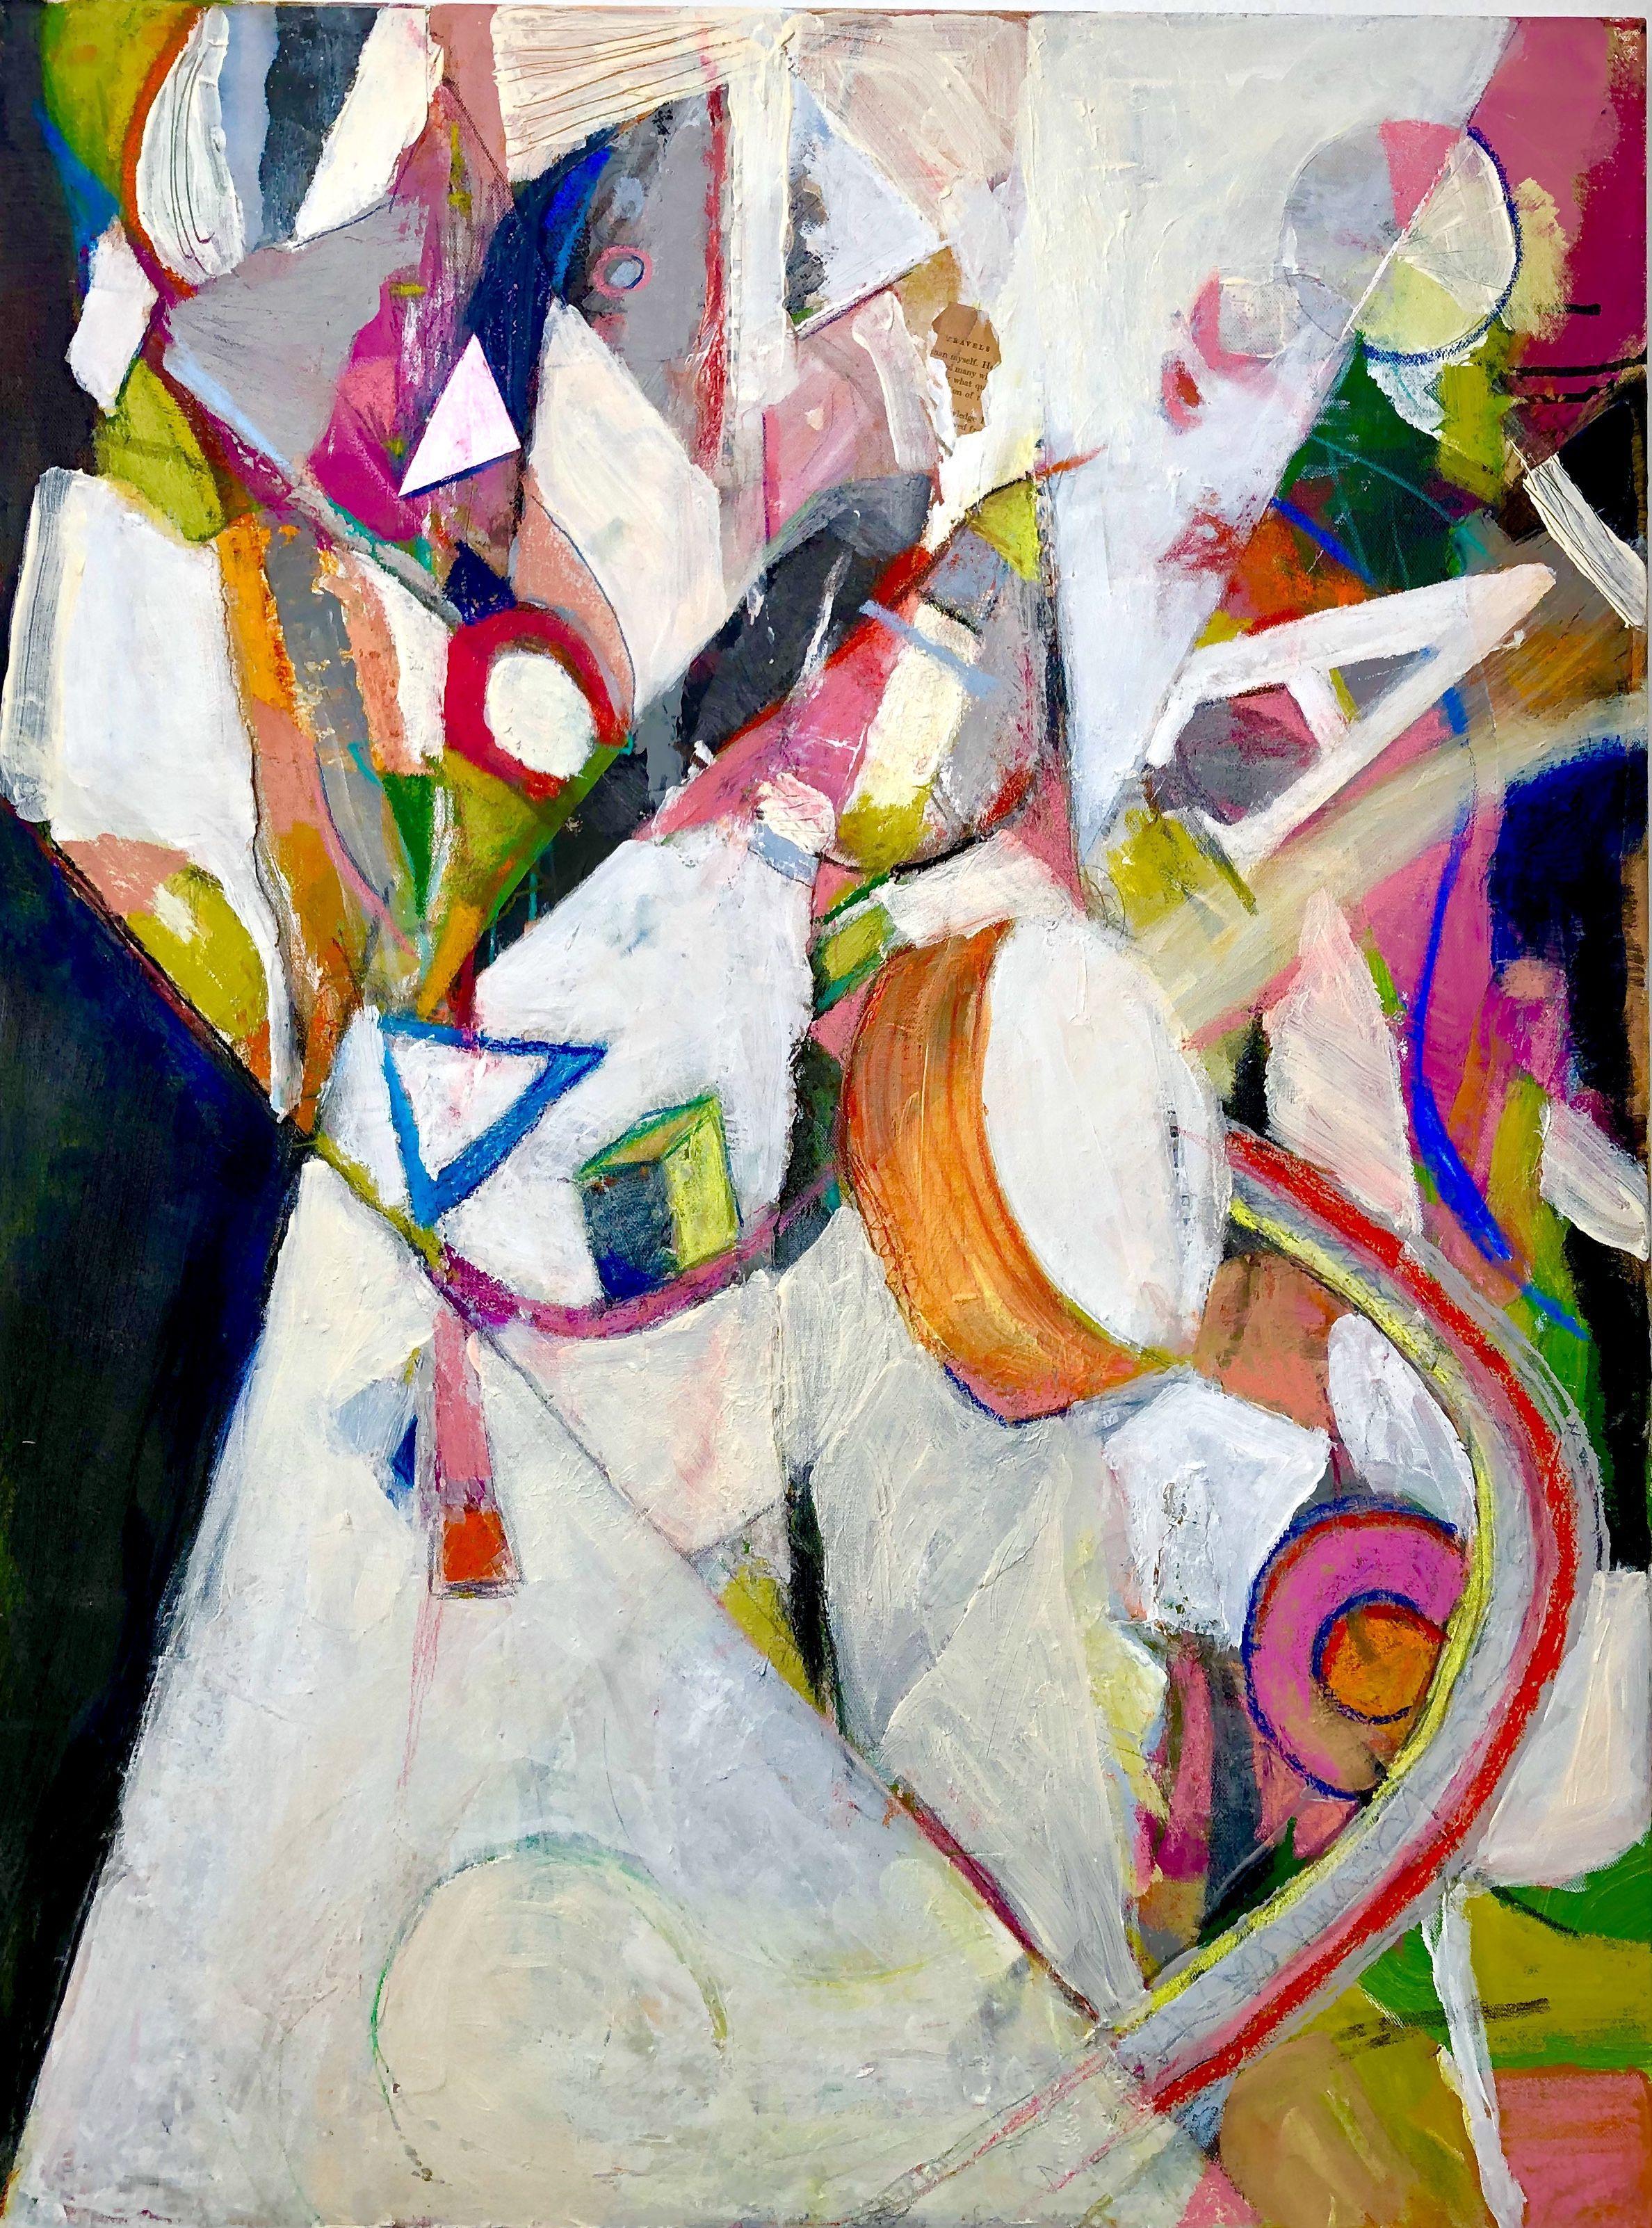 Abstract Painting Alise Sheehan - Triangle rose, peinture, acrylique sur toile